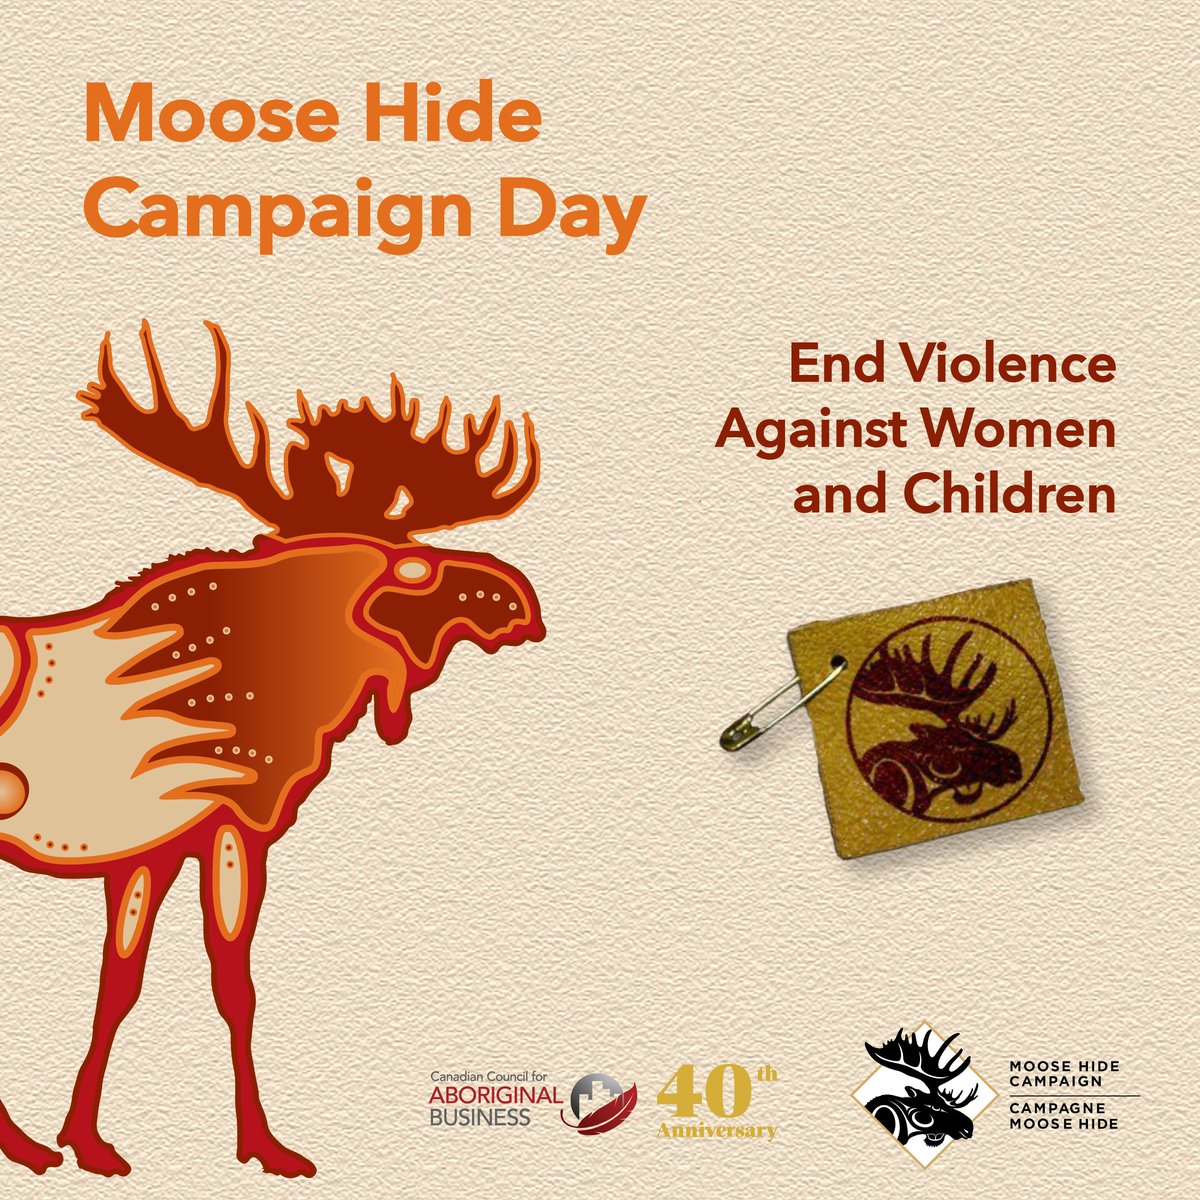 Today, we wear our moose hide pins in honour of Moose Hide Campaign Day, not just to reflect on the perseverance of those affected by domestic violence, but to take action to end violence against women and children. Learn more moosehidecampaign.ca #MooseHideCampaignDay